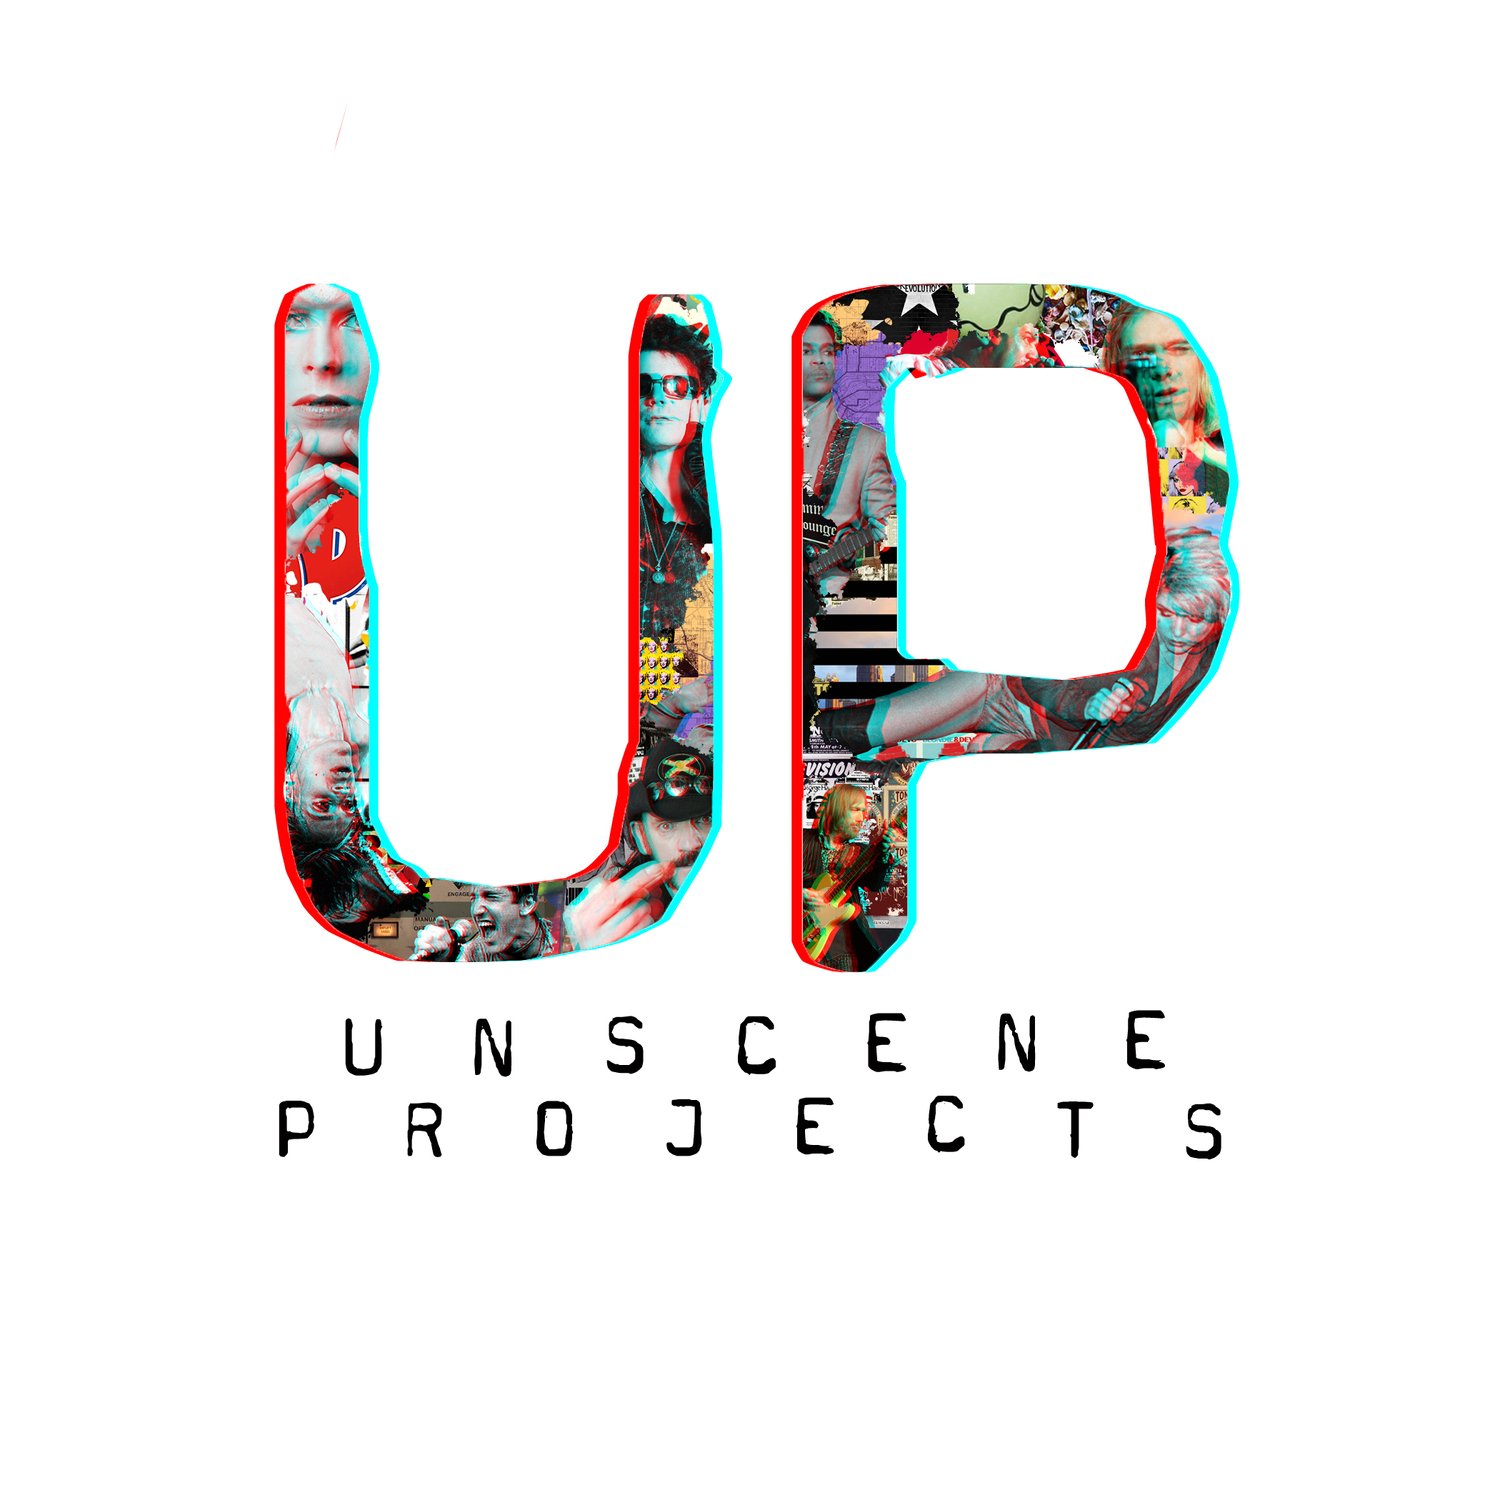 Unscene Projects